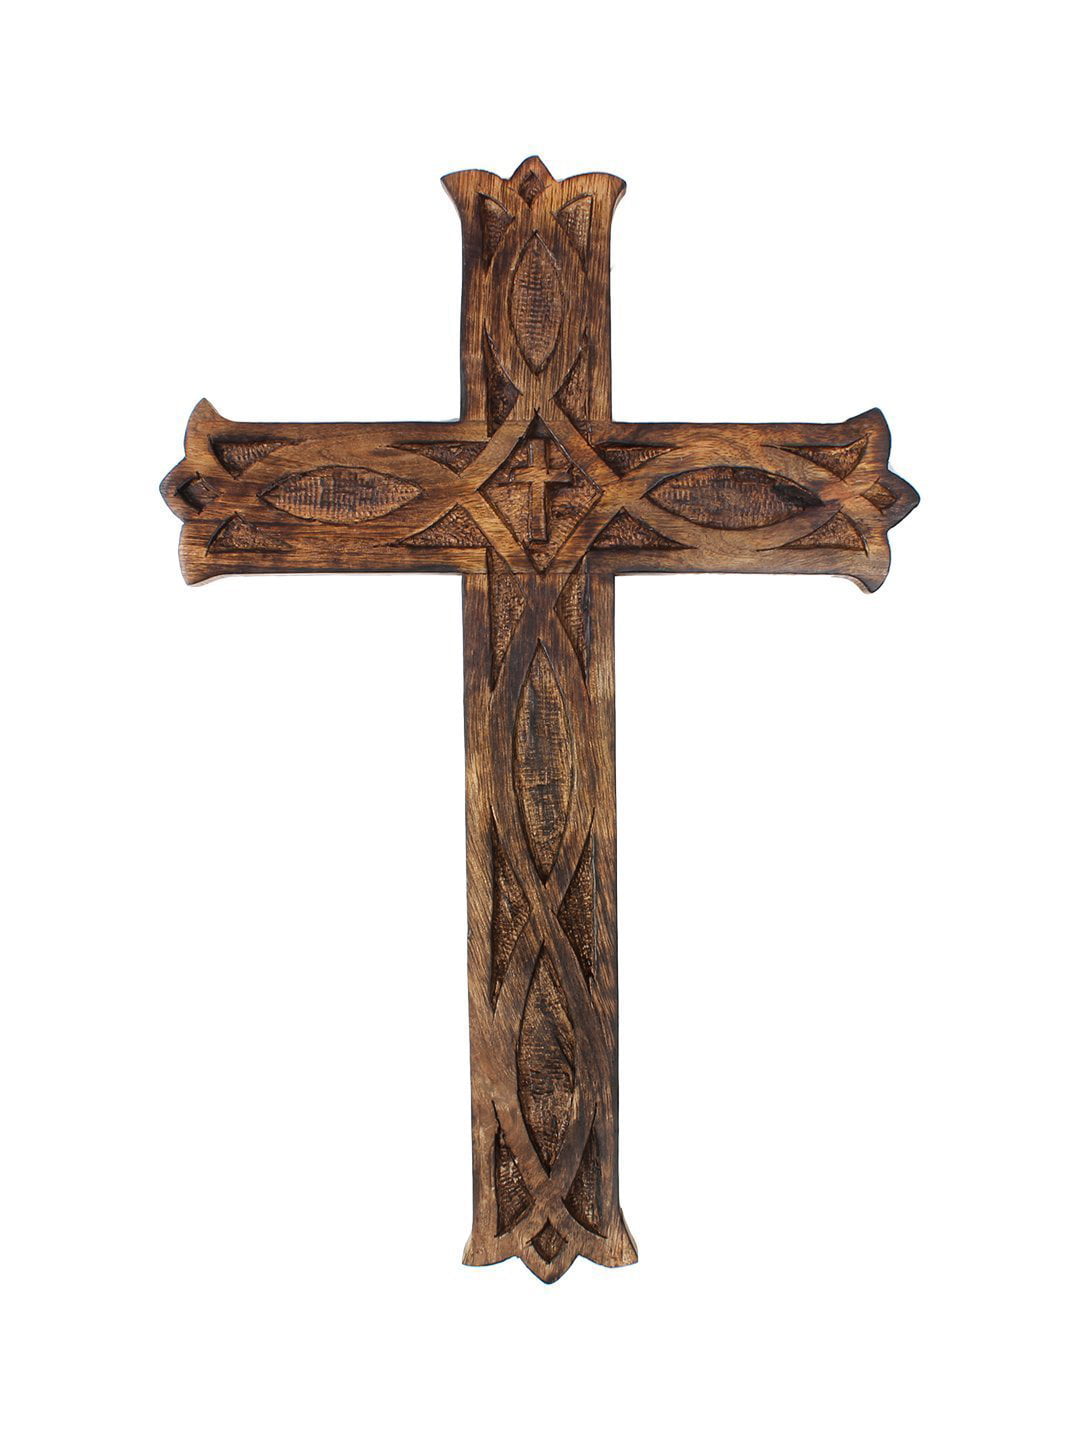 Wooden Religious Catholic Crucifix Cross Wall Hanging 12 x 8 Inches French Plaque Floral Carvings Living Room Home Decor Accent Church Chapel Altar Wall Art Decor Display Antiqued Rustic Finish